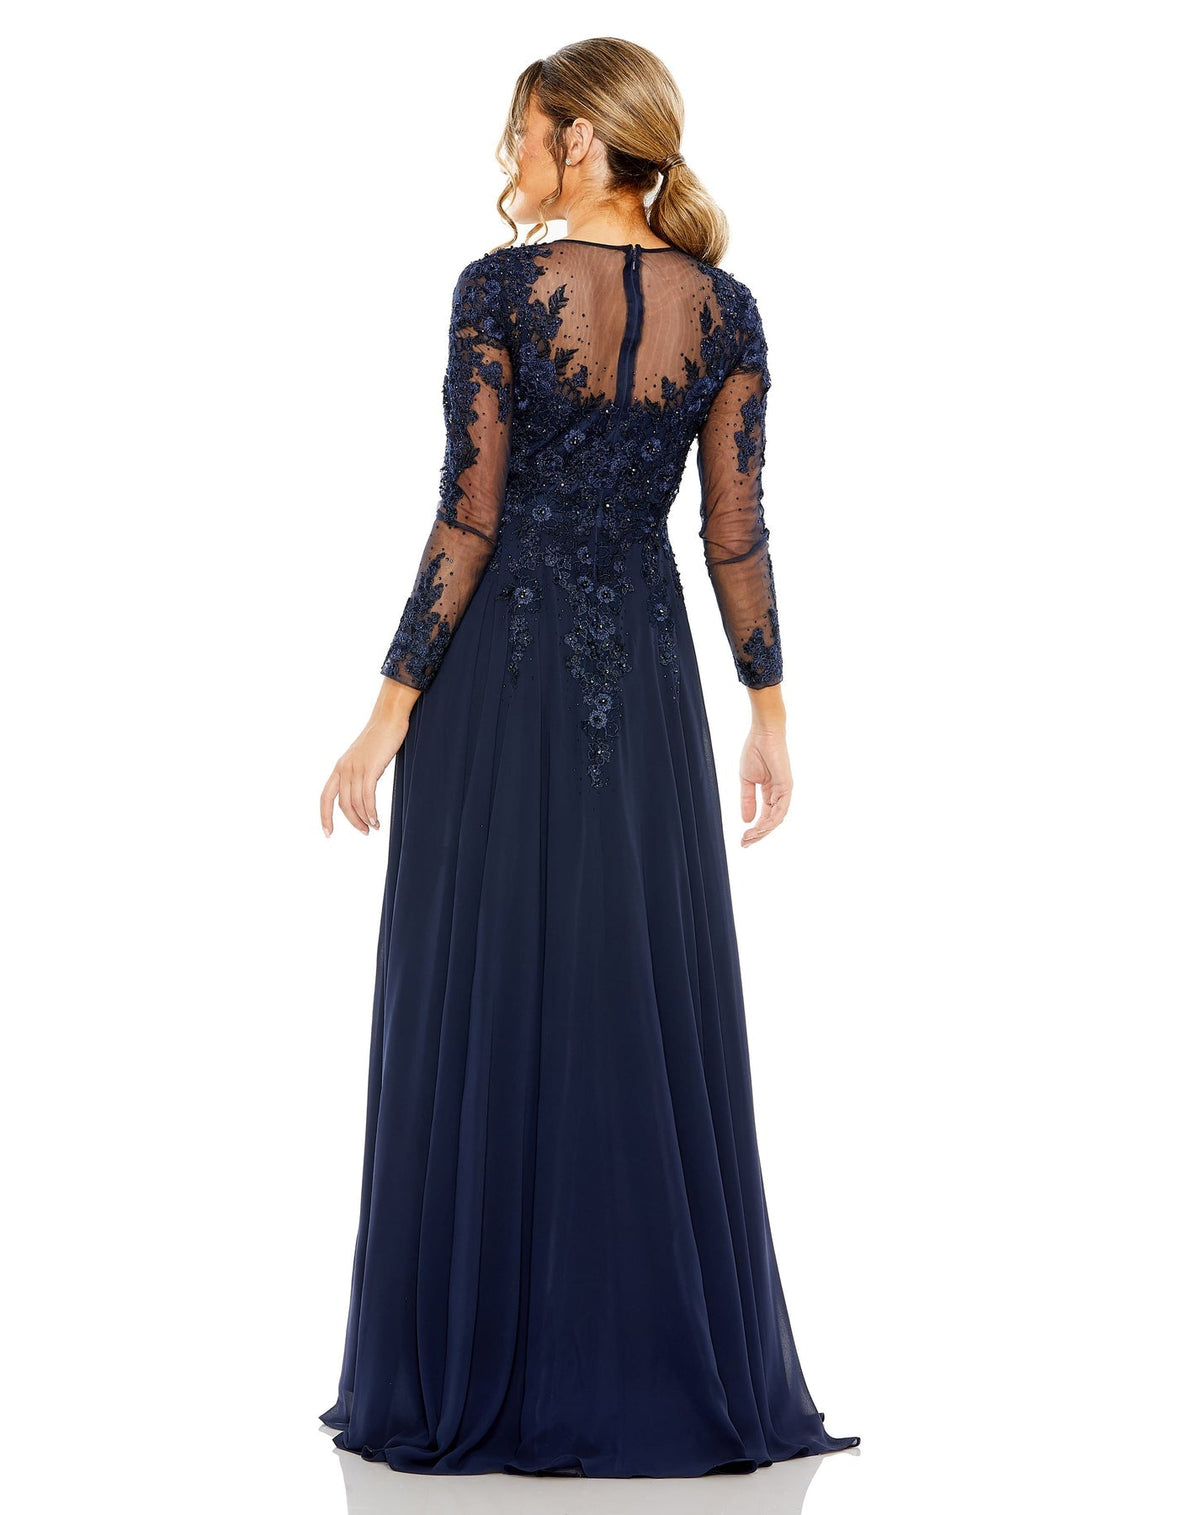 High neck long sleeve crystal embellished A Line gown - Midnight Blue